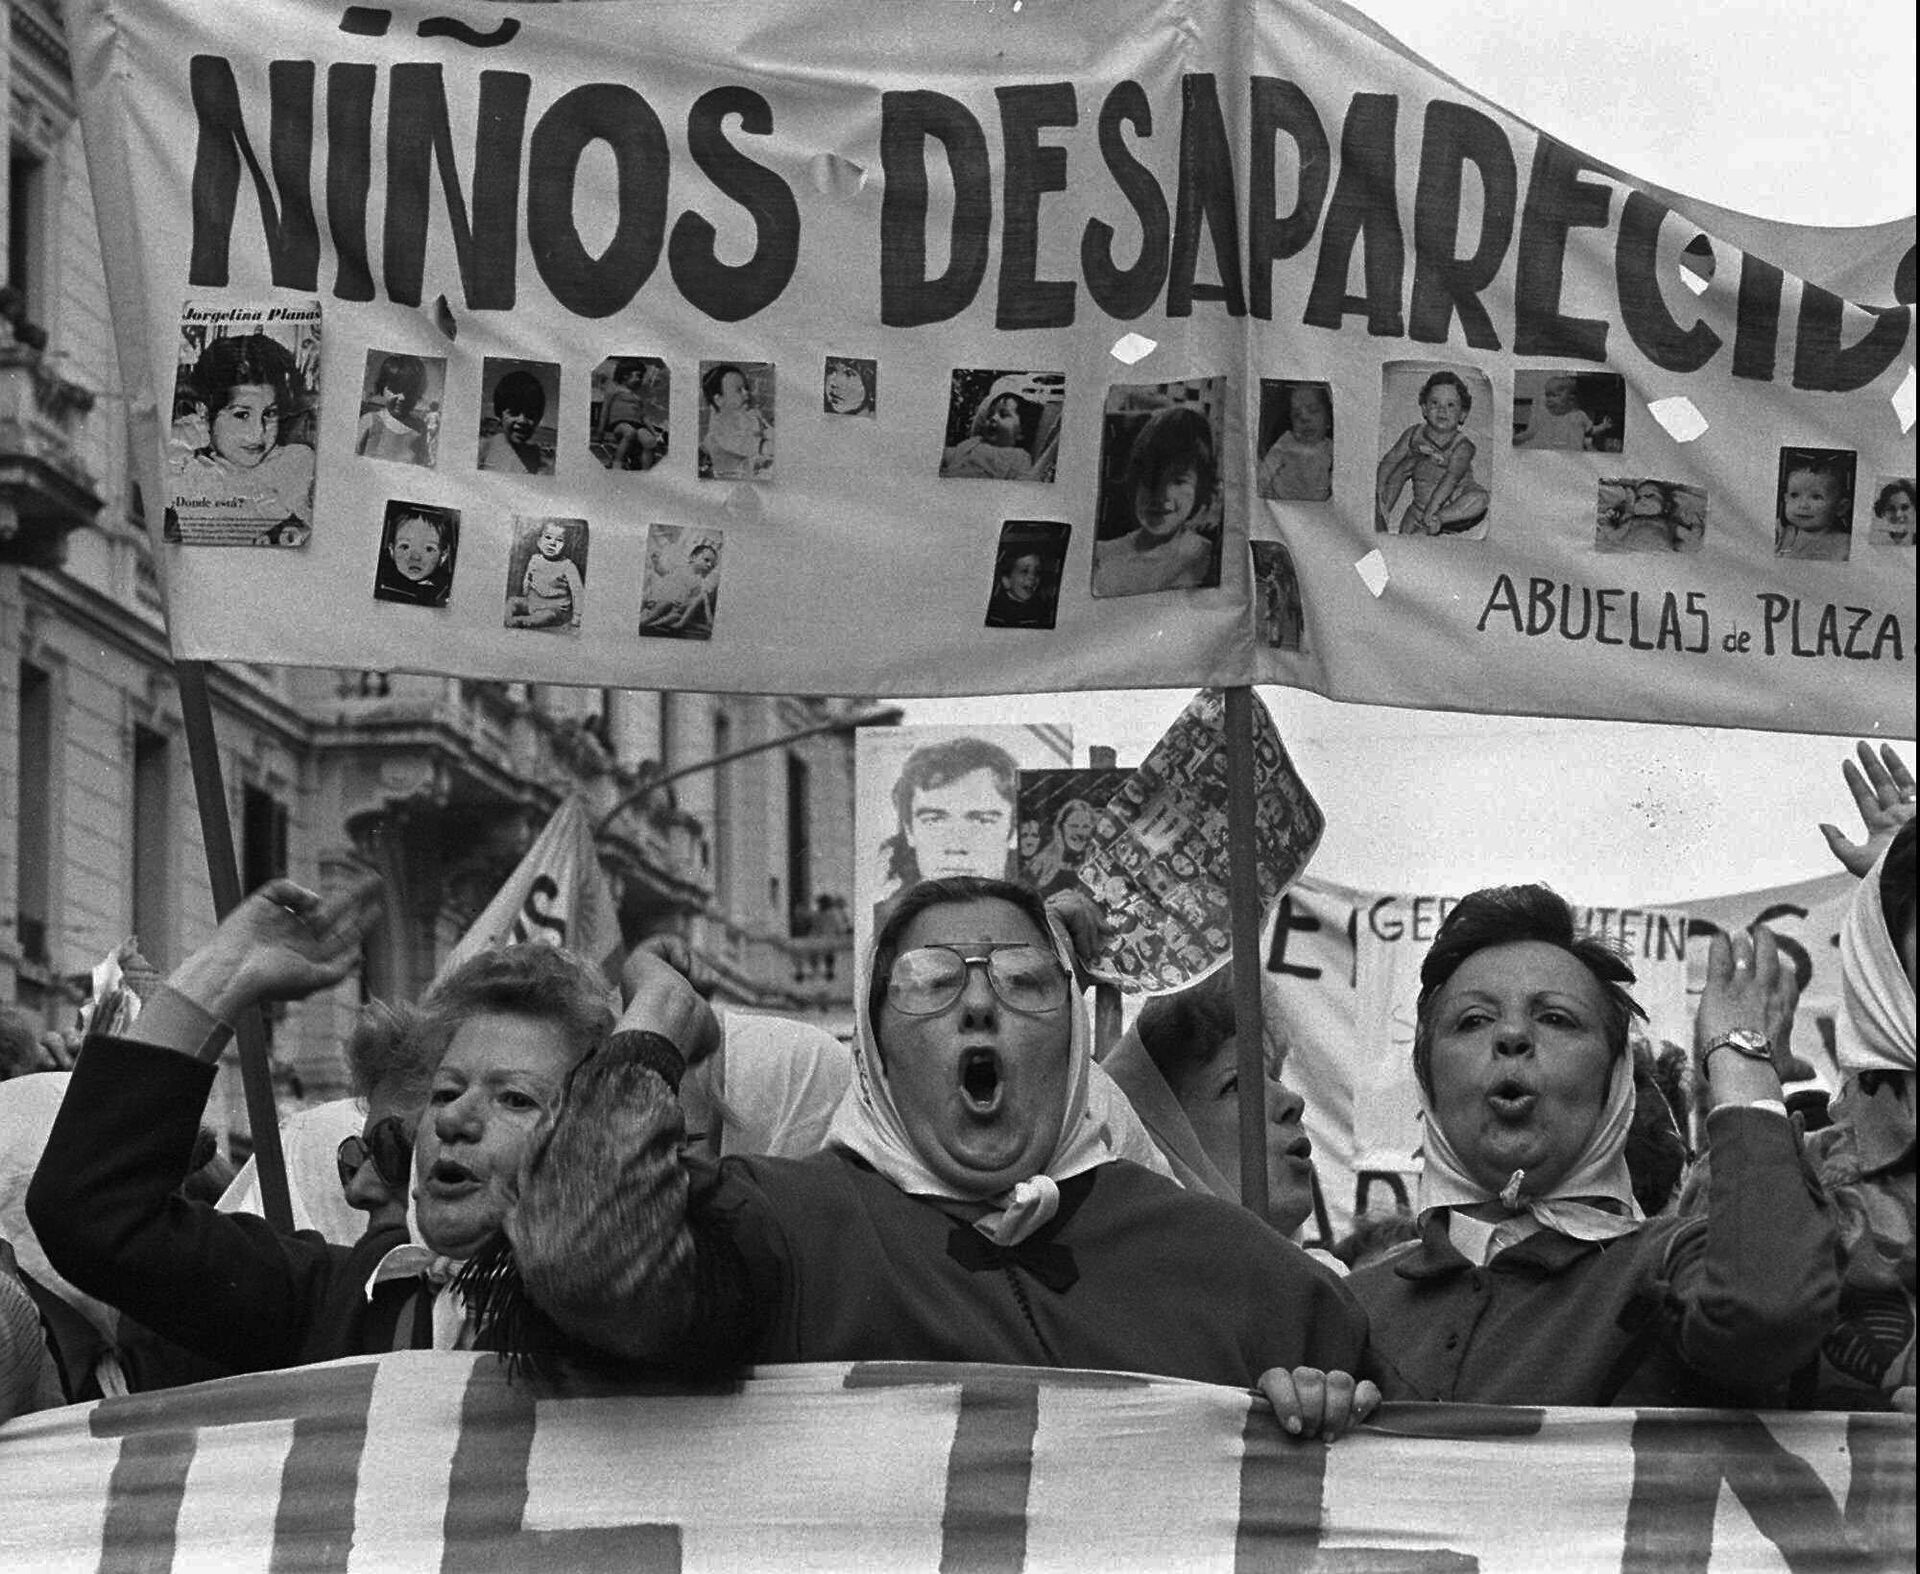 FILE - In this in December 1979 file photo, Argentina's Mothers of Plaza de Mayo human rights group, whose children have disappeared, march in Buenos Aires's Plaza de Mayo. About 9,000 people were ultimately killed or disappeared during Argentina’s 1976-1983 dictatorship, according to an official accounting after democracy returned. Human rights activists believe the real number was as high as 30,000. The dead were not only those involved in the armed conflict, but journalists, dissidents, unionists and citizens caught in the crossfire. - Sputnik International, 1920, 03.12.2023